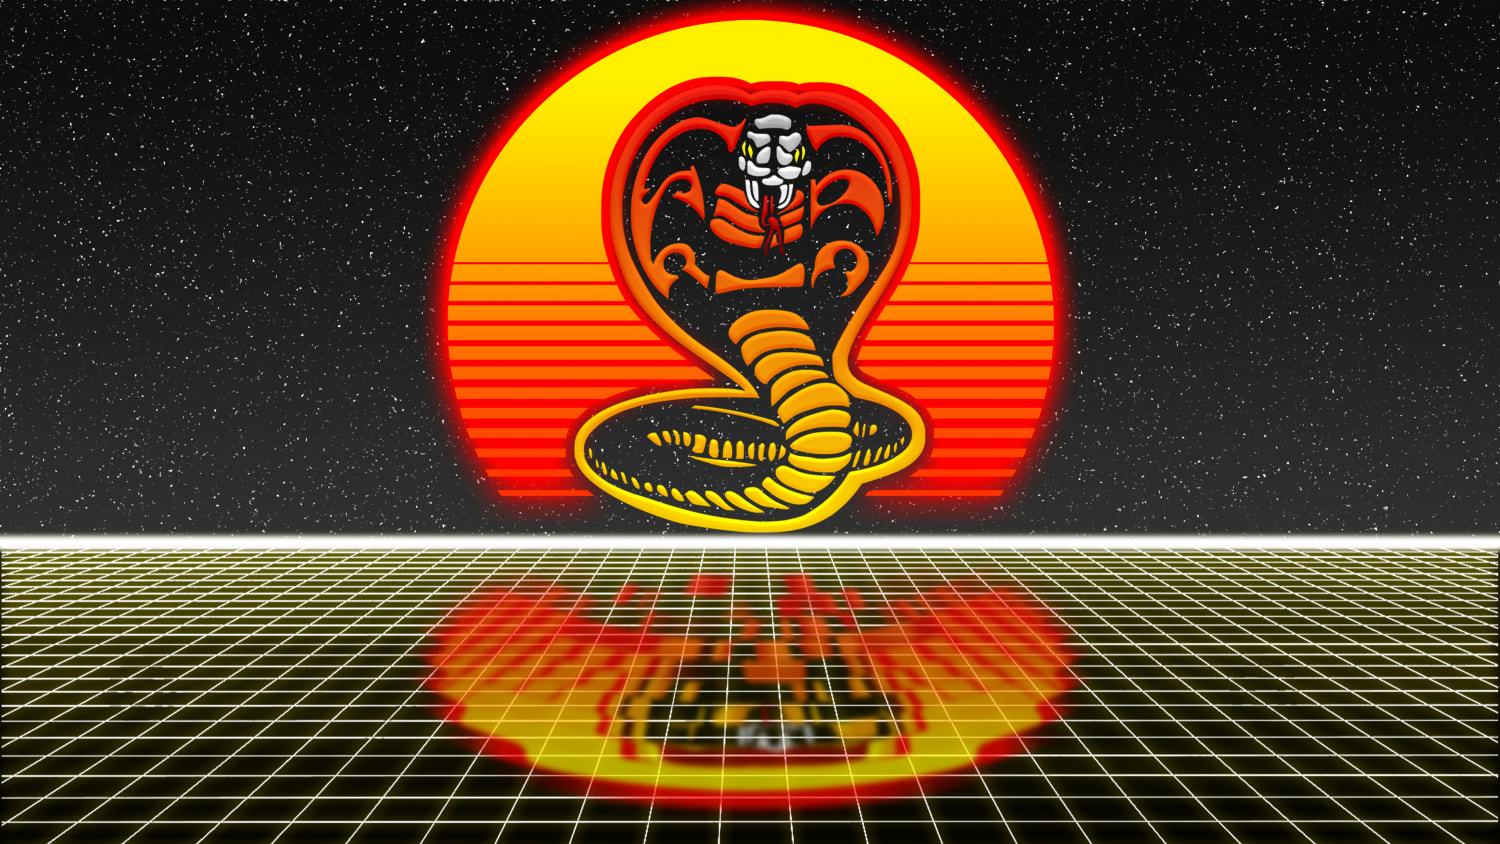 I remastered a Miyagi-Do wallpaper a few weeks back, and someone asked about others, so I gave the same treatment to my Cobra Kai one. Now to make an Eagle Fang wallpaper too. Coming soon.